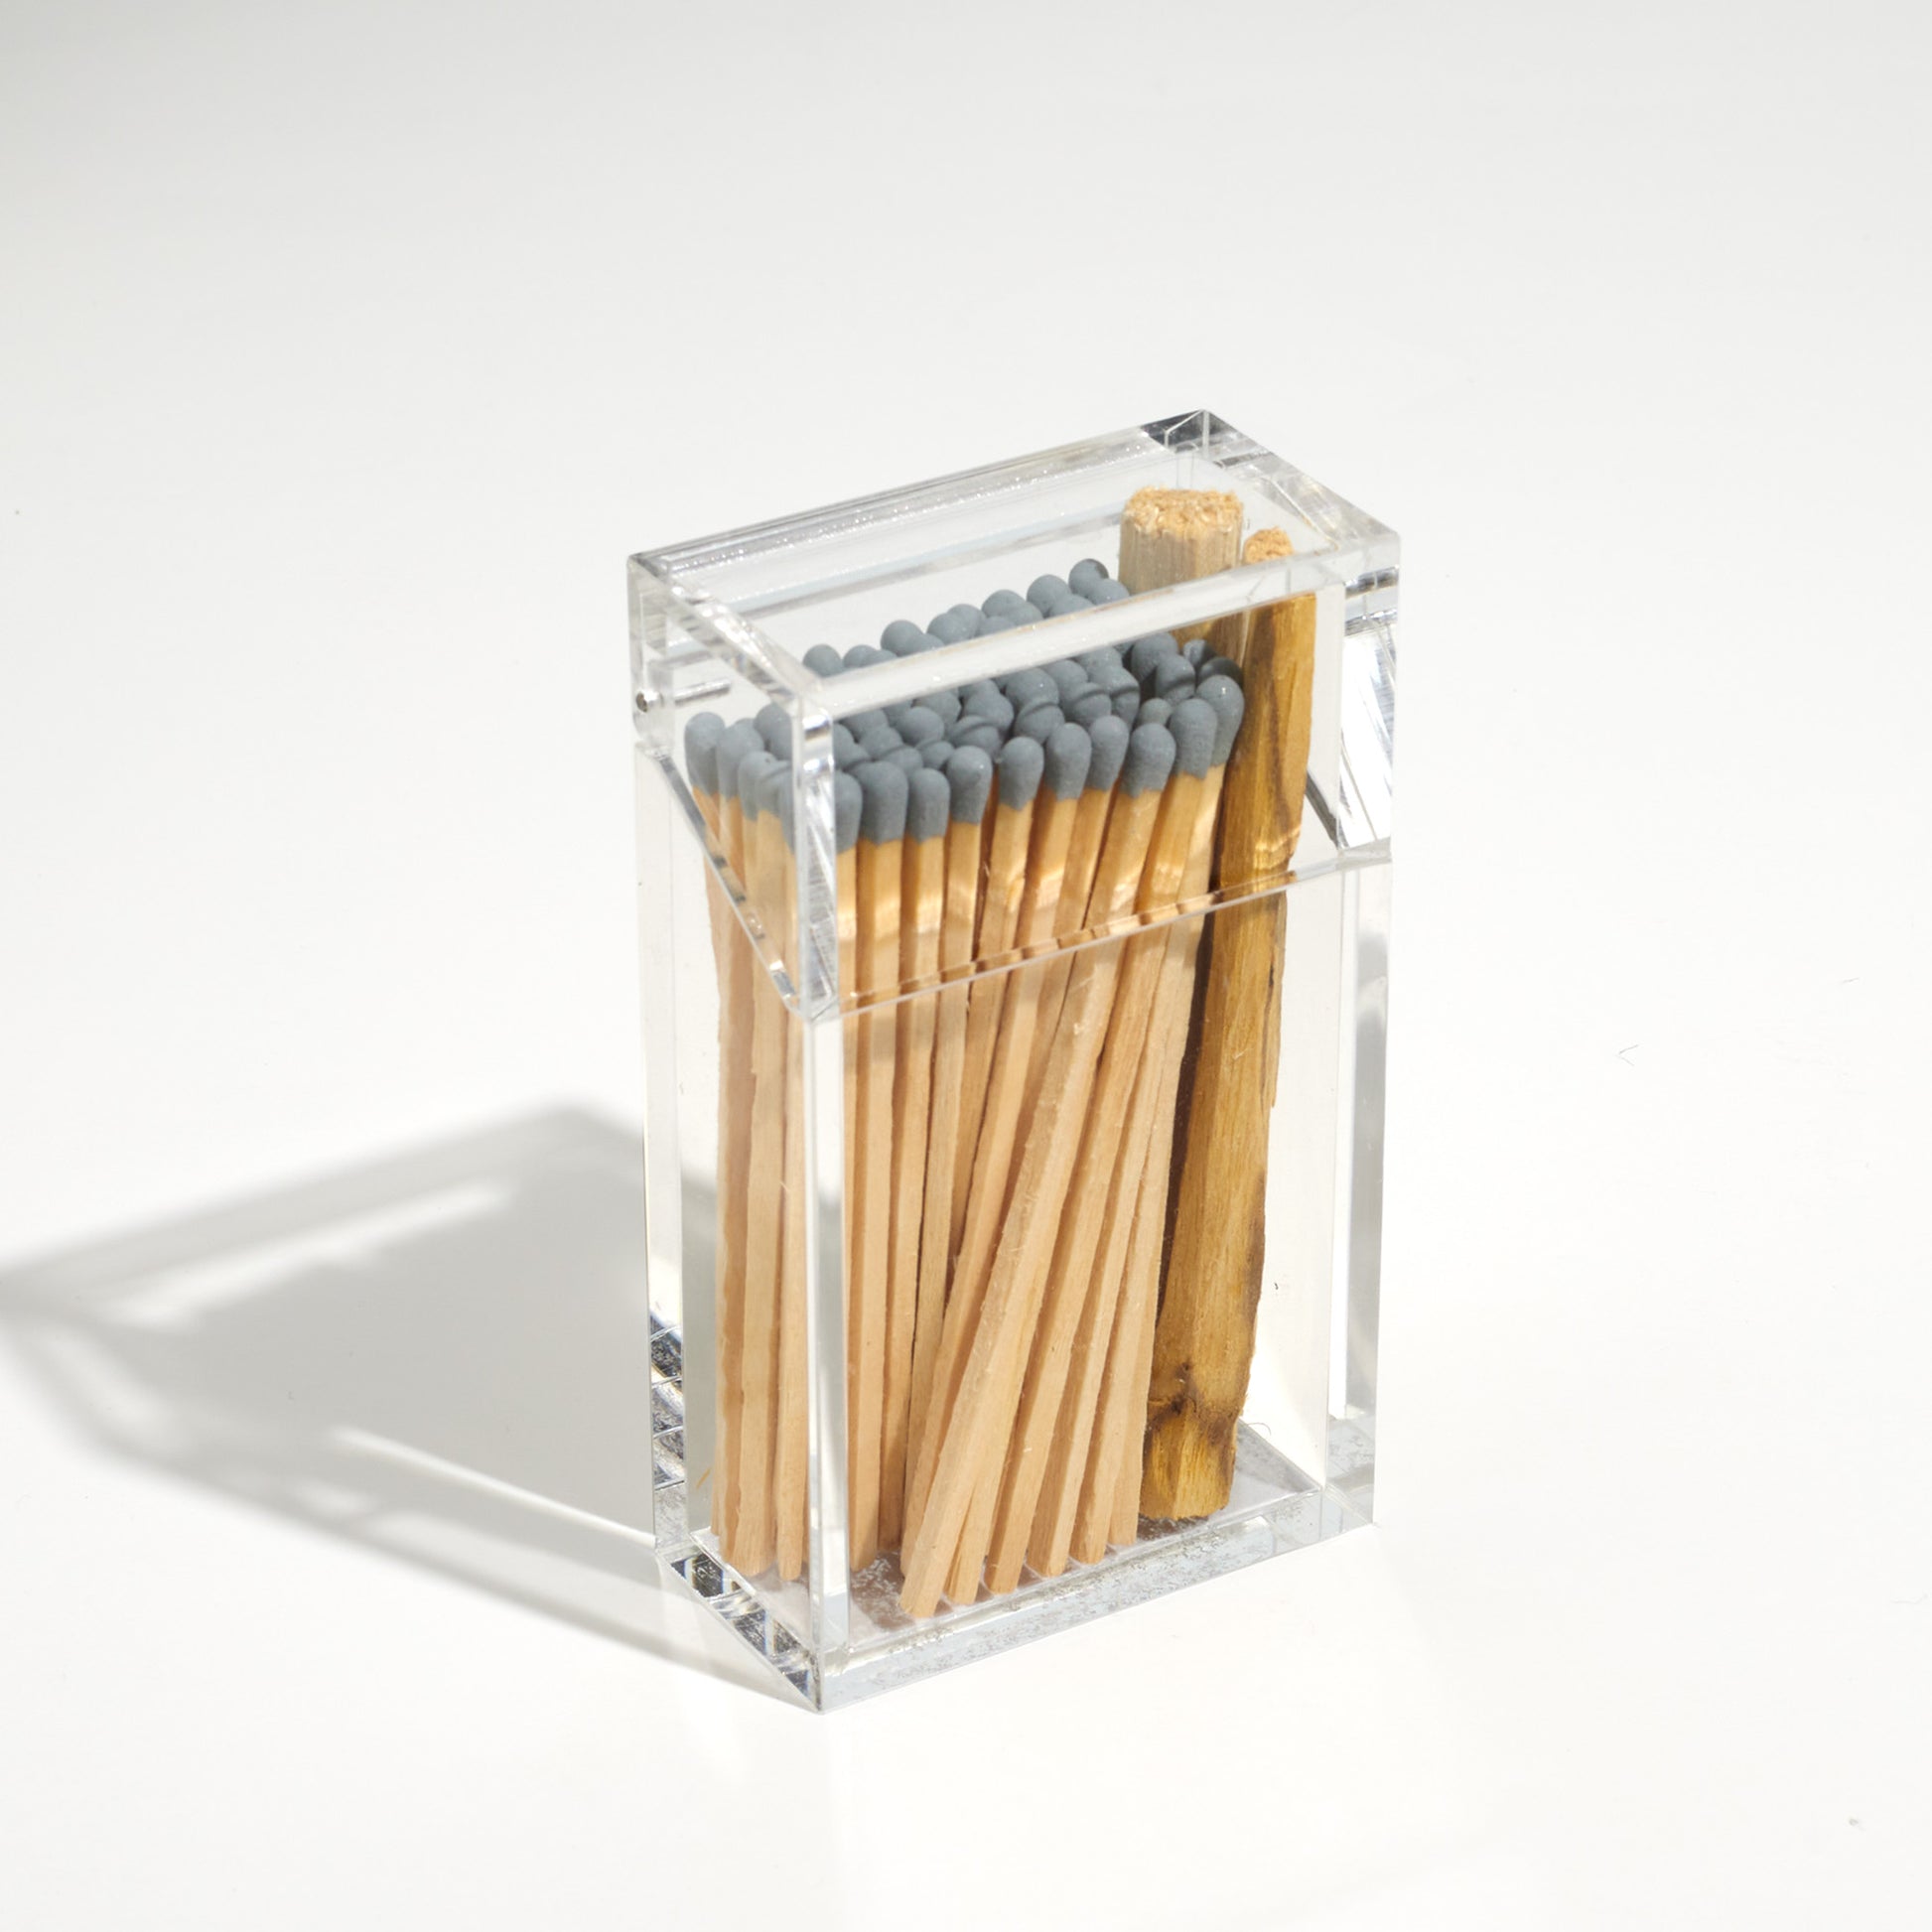 Closed Cigarette style acrylic case with Gray matches and palo santo in it. 